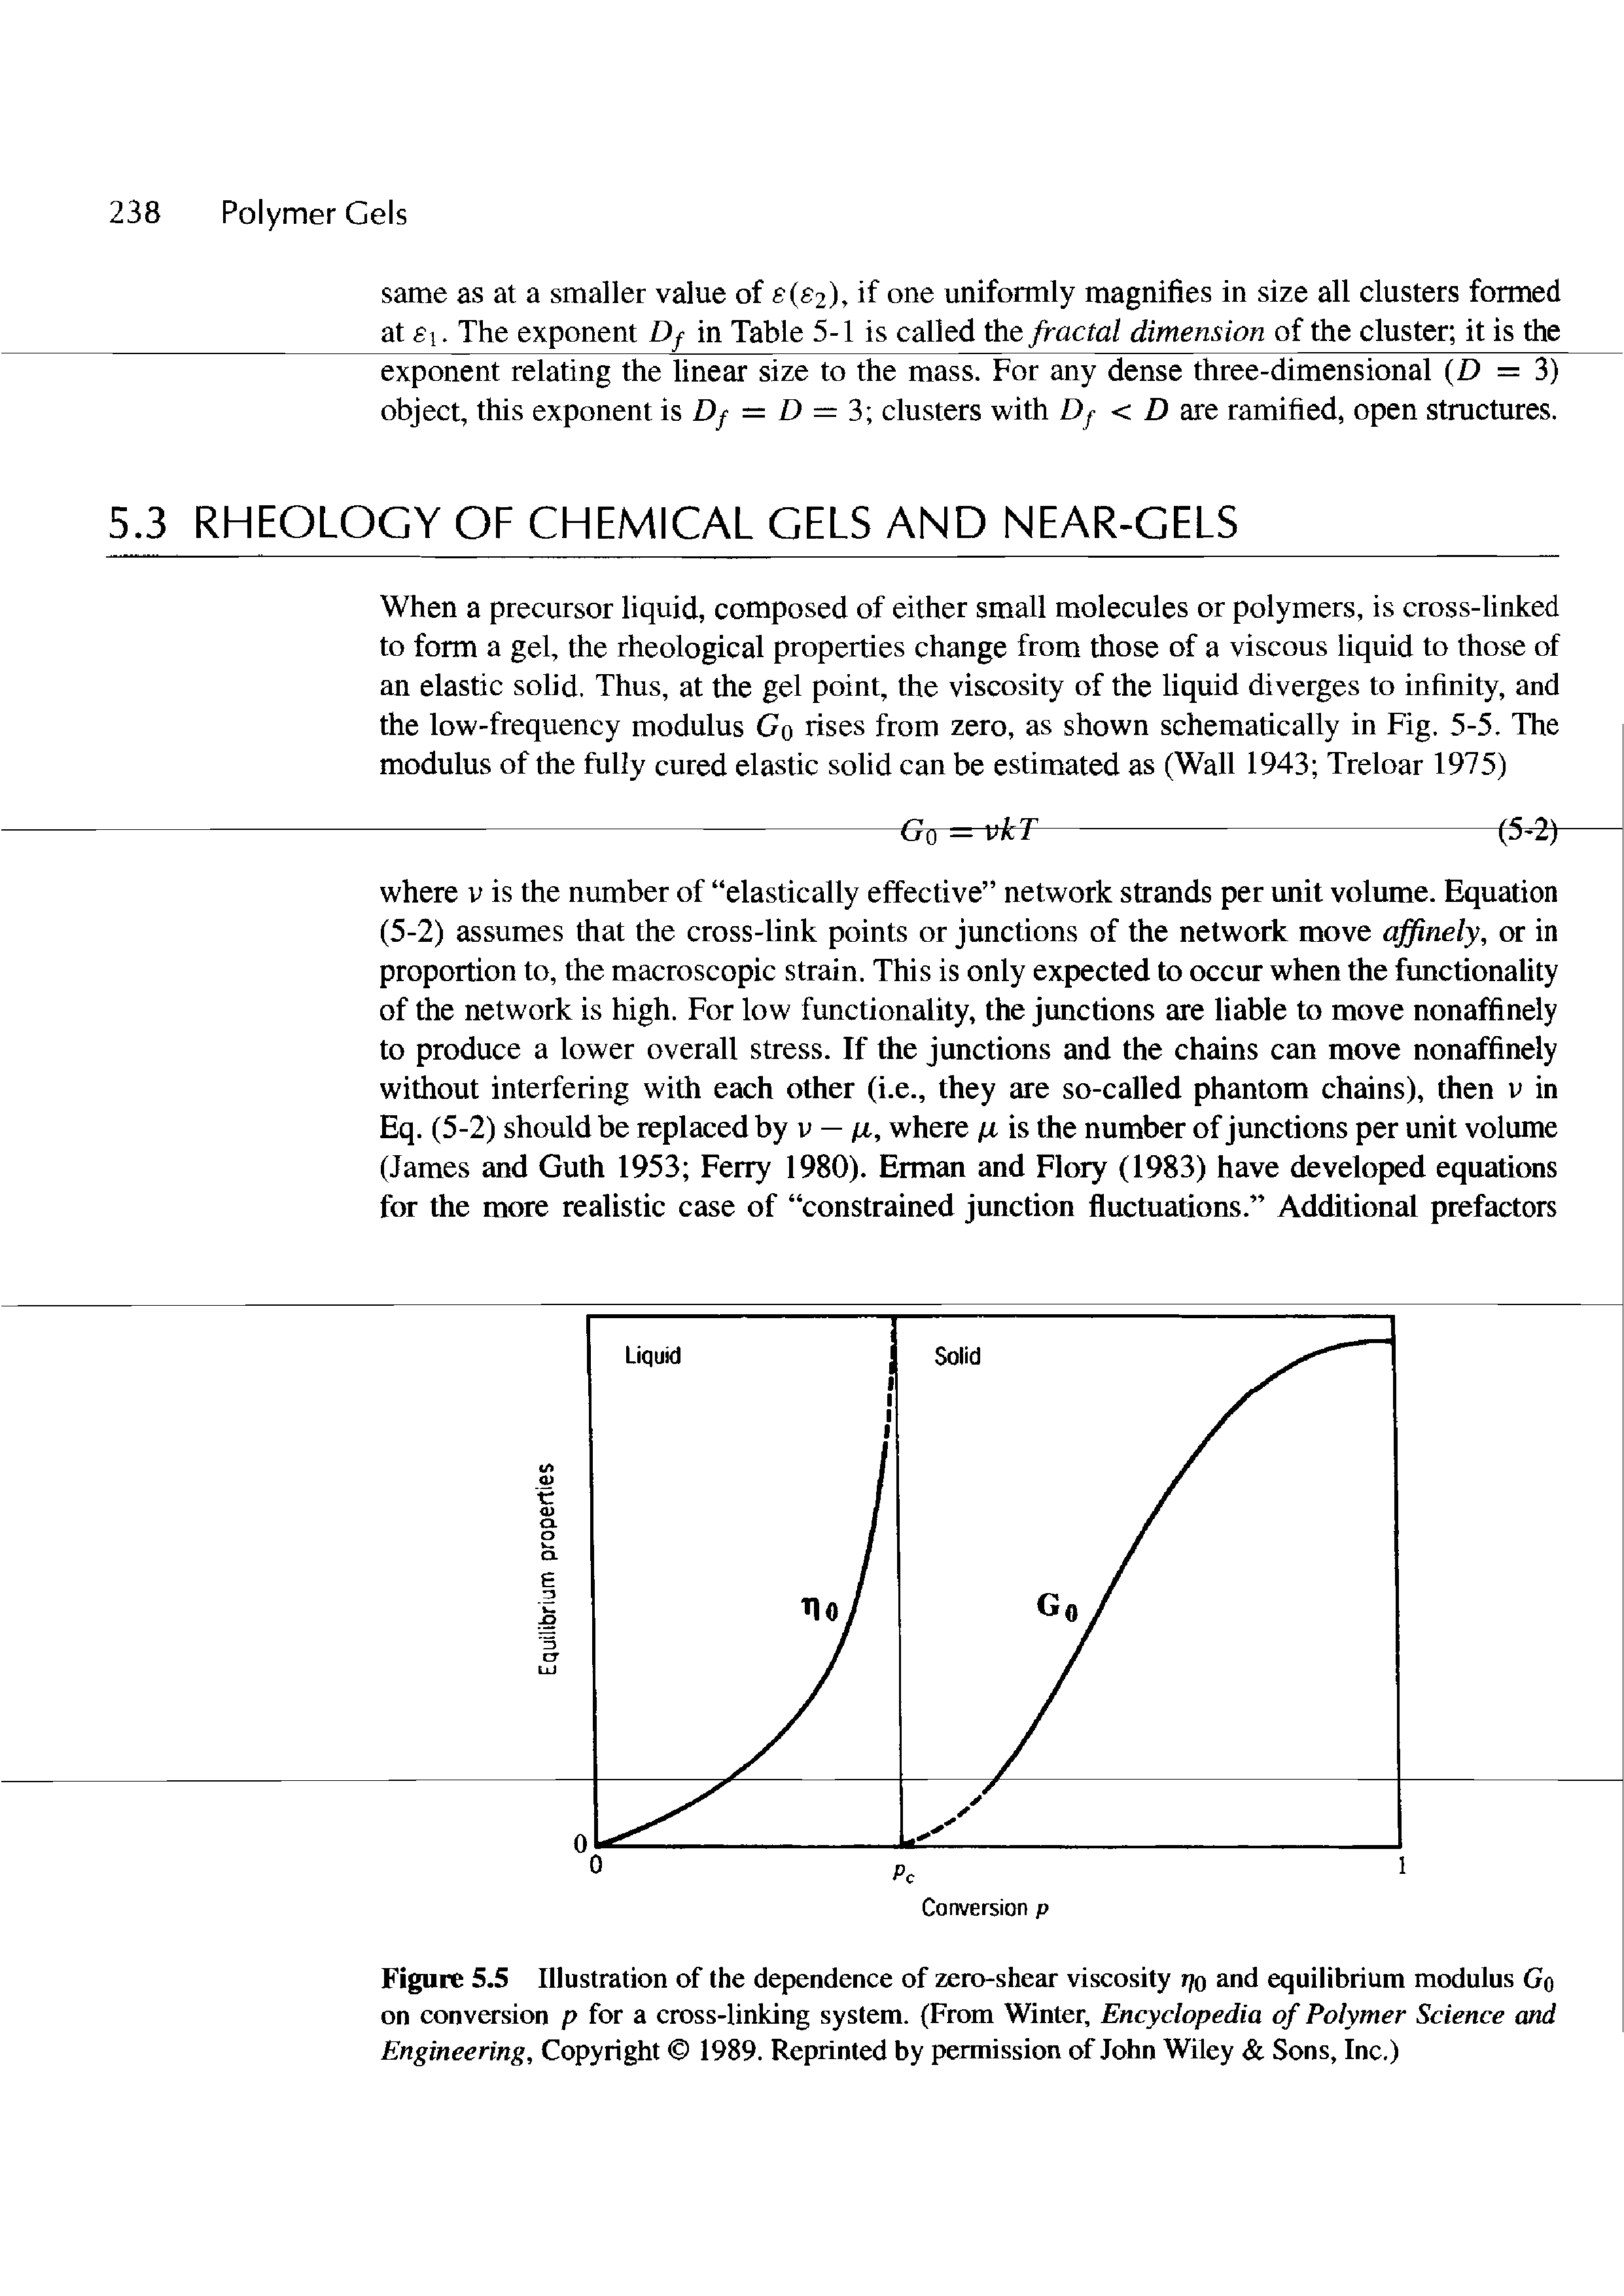 Figure 5.5 Illustration of the dependence of zero-shear viscosity t]o and equilibrium modulus Go on conversion p for a cross-linking system. (From Winter, Encyclopedia of Polymer Science and Engineering, Copyright 1989. Reprinted by permission of John Wiley Sons, Inc.)...